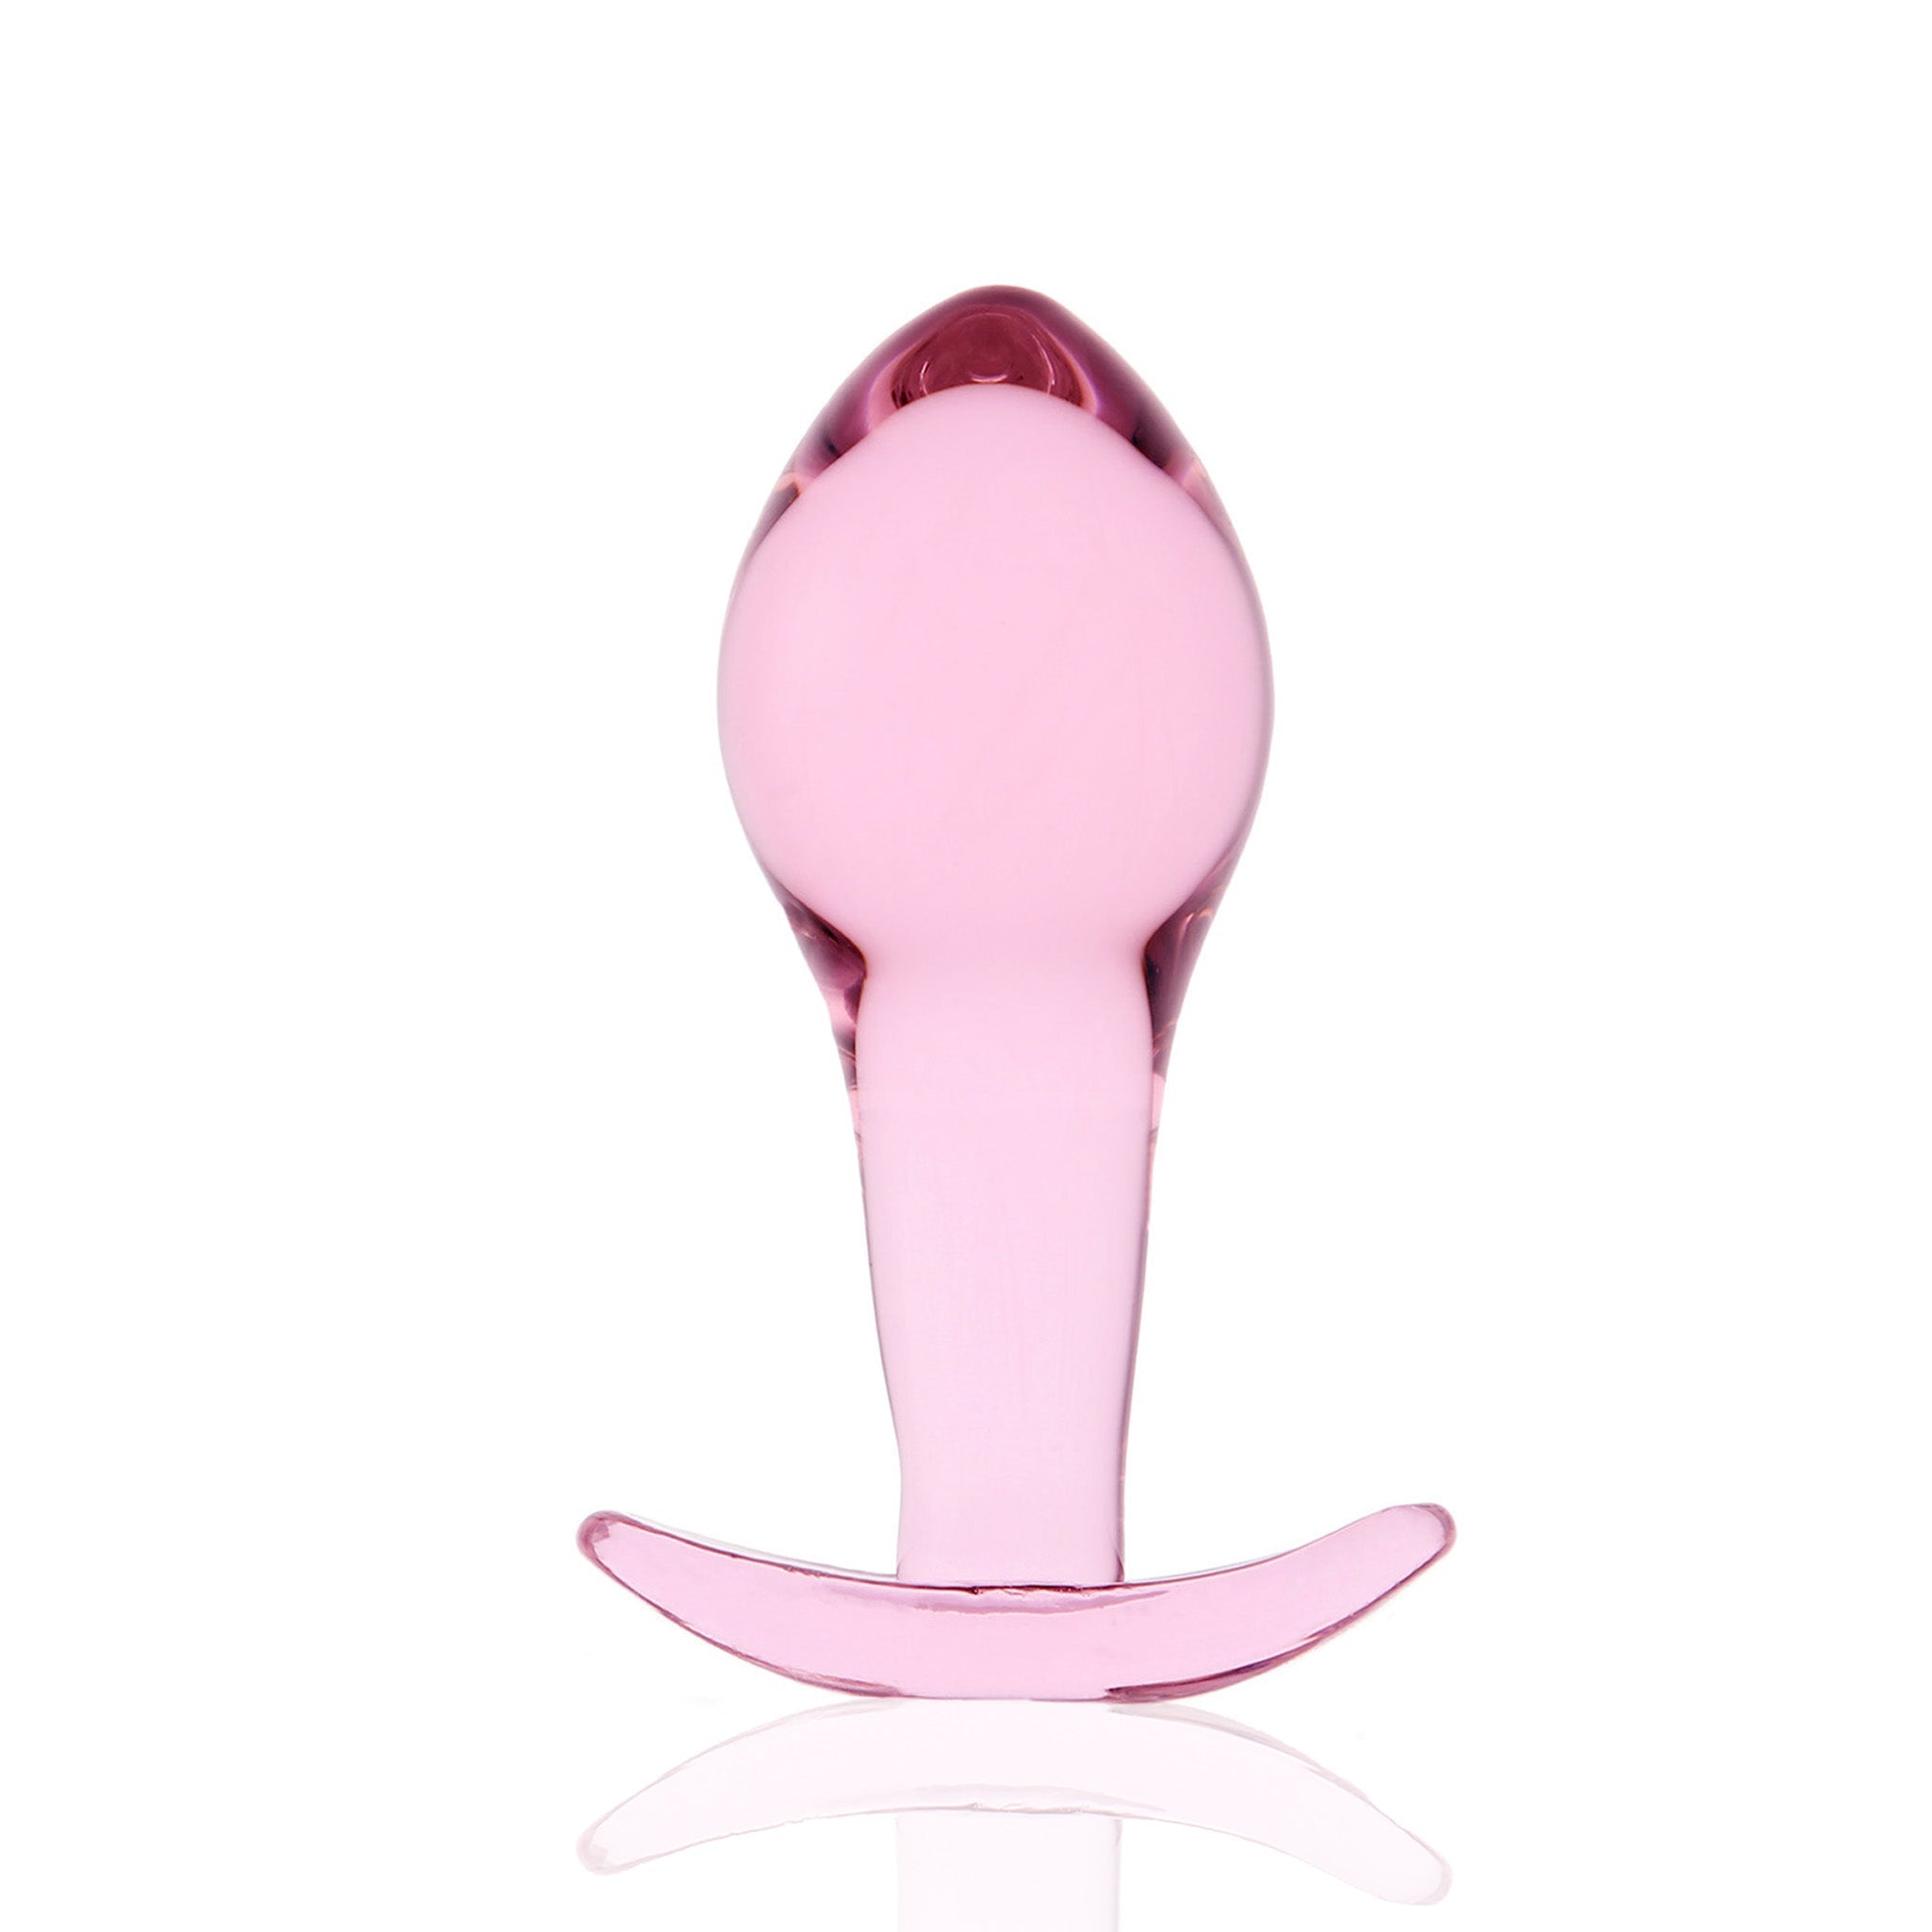 3.35" Wearable Pink Glass Anal Butt Plug Dildo Beginner Anal Trainer Sex Toys